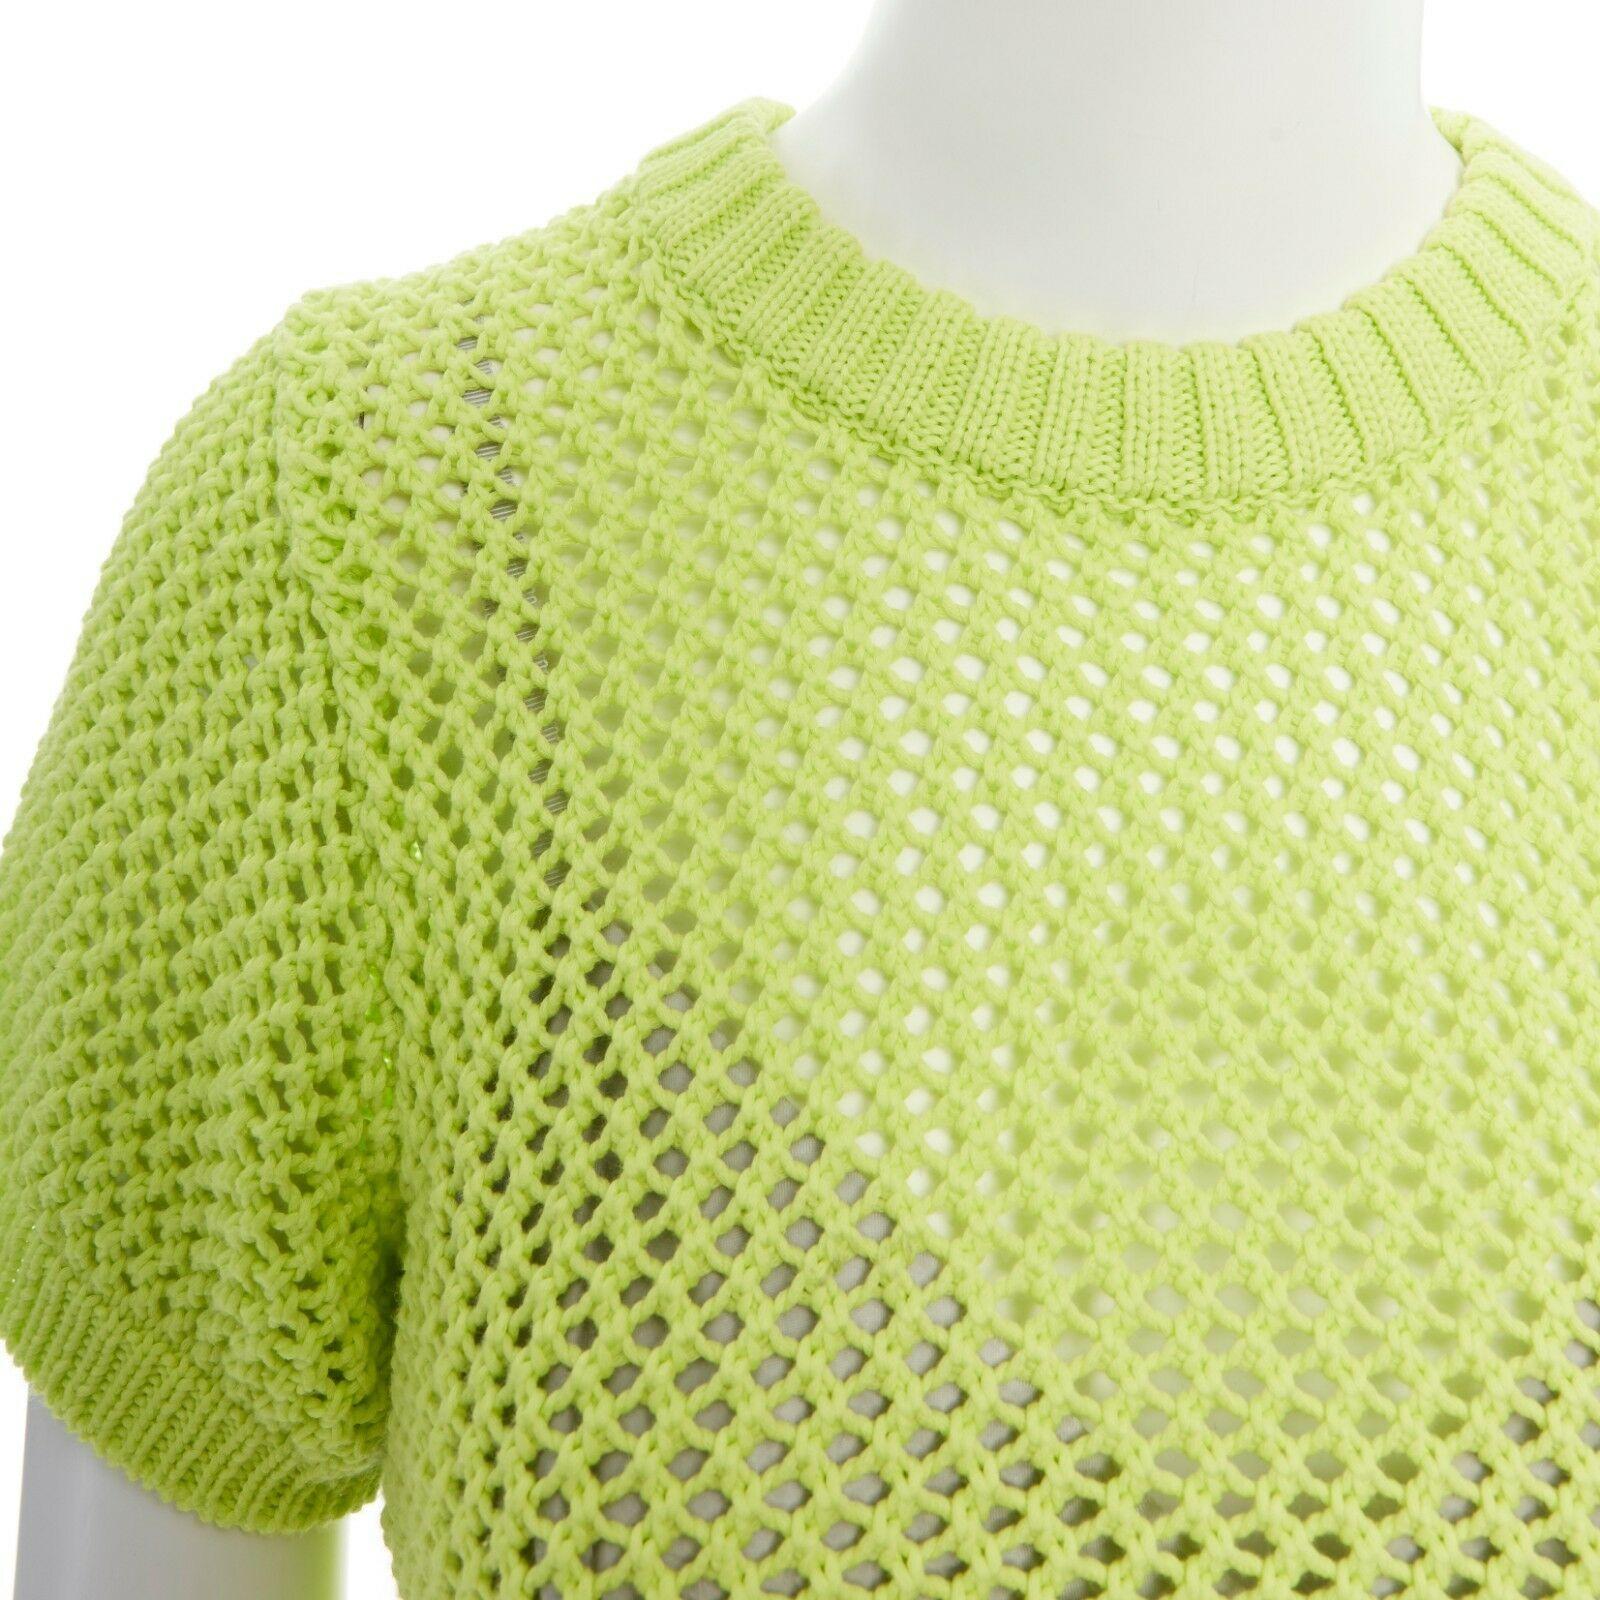 SACAI LUCK neon yellow grey lace trimmed camisole crochet knit sweater top JP3 L 2